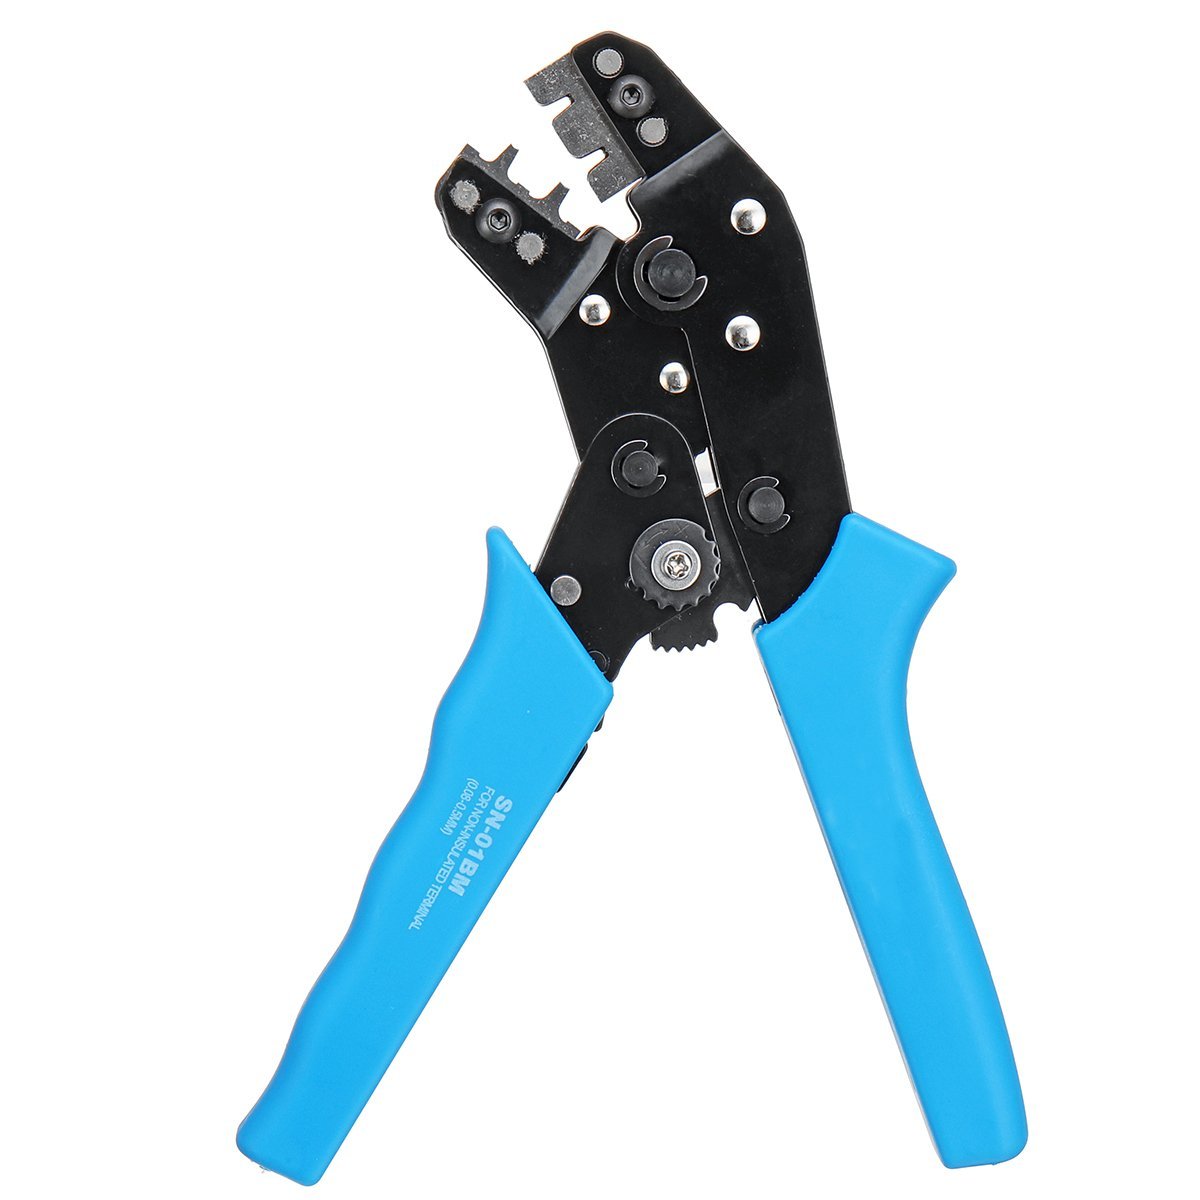 AWG28-20 Self-adjusting Terminal Wire Cable Crimping Pliers Tool for Dupont PH2.0 XH2.54 KF2510 JST Molex D-SUB Terminal